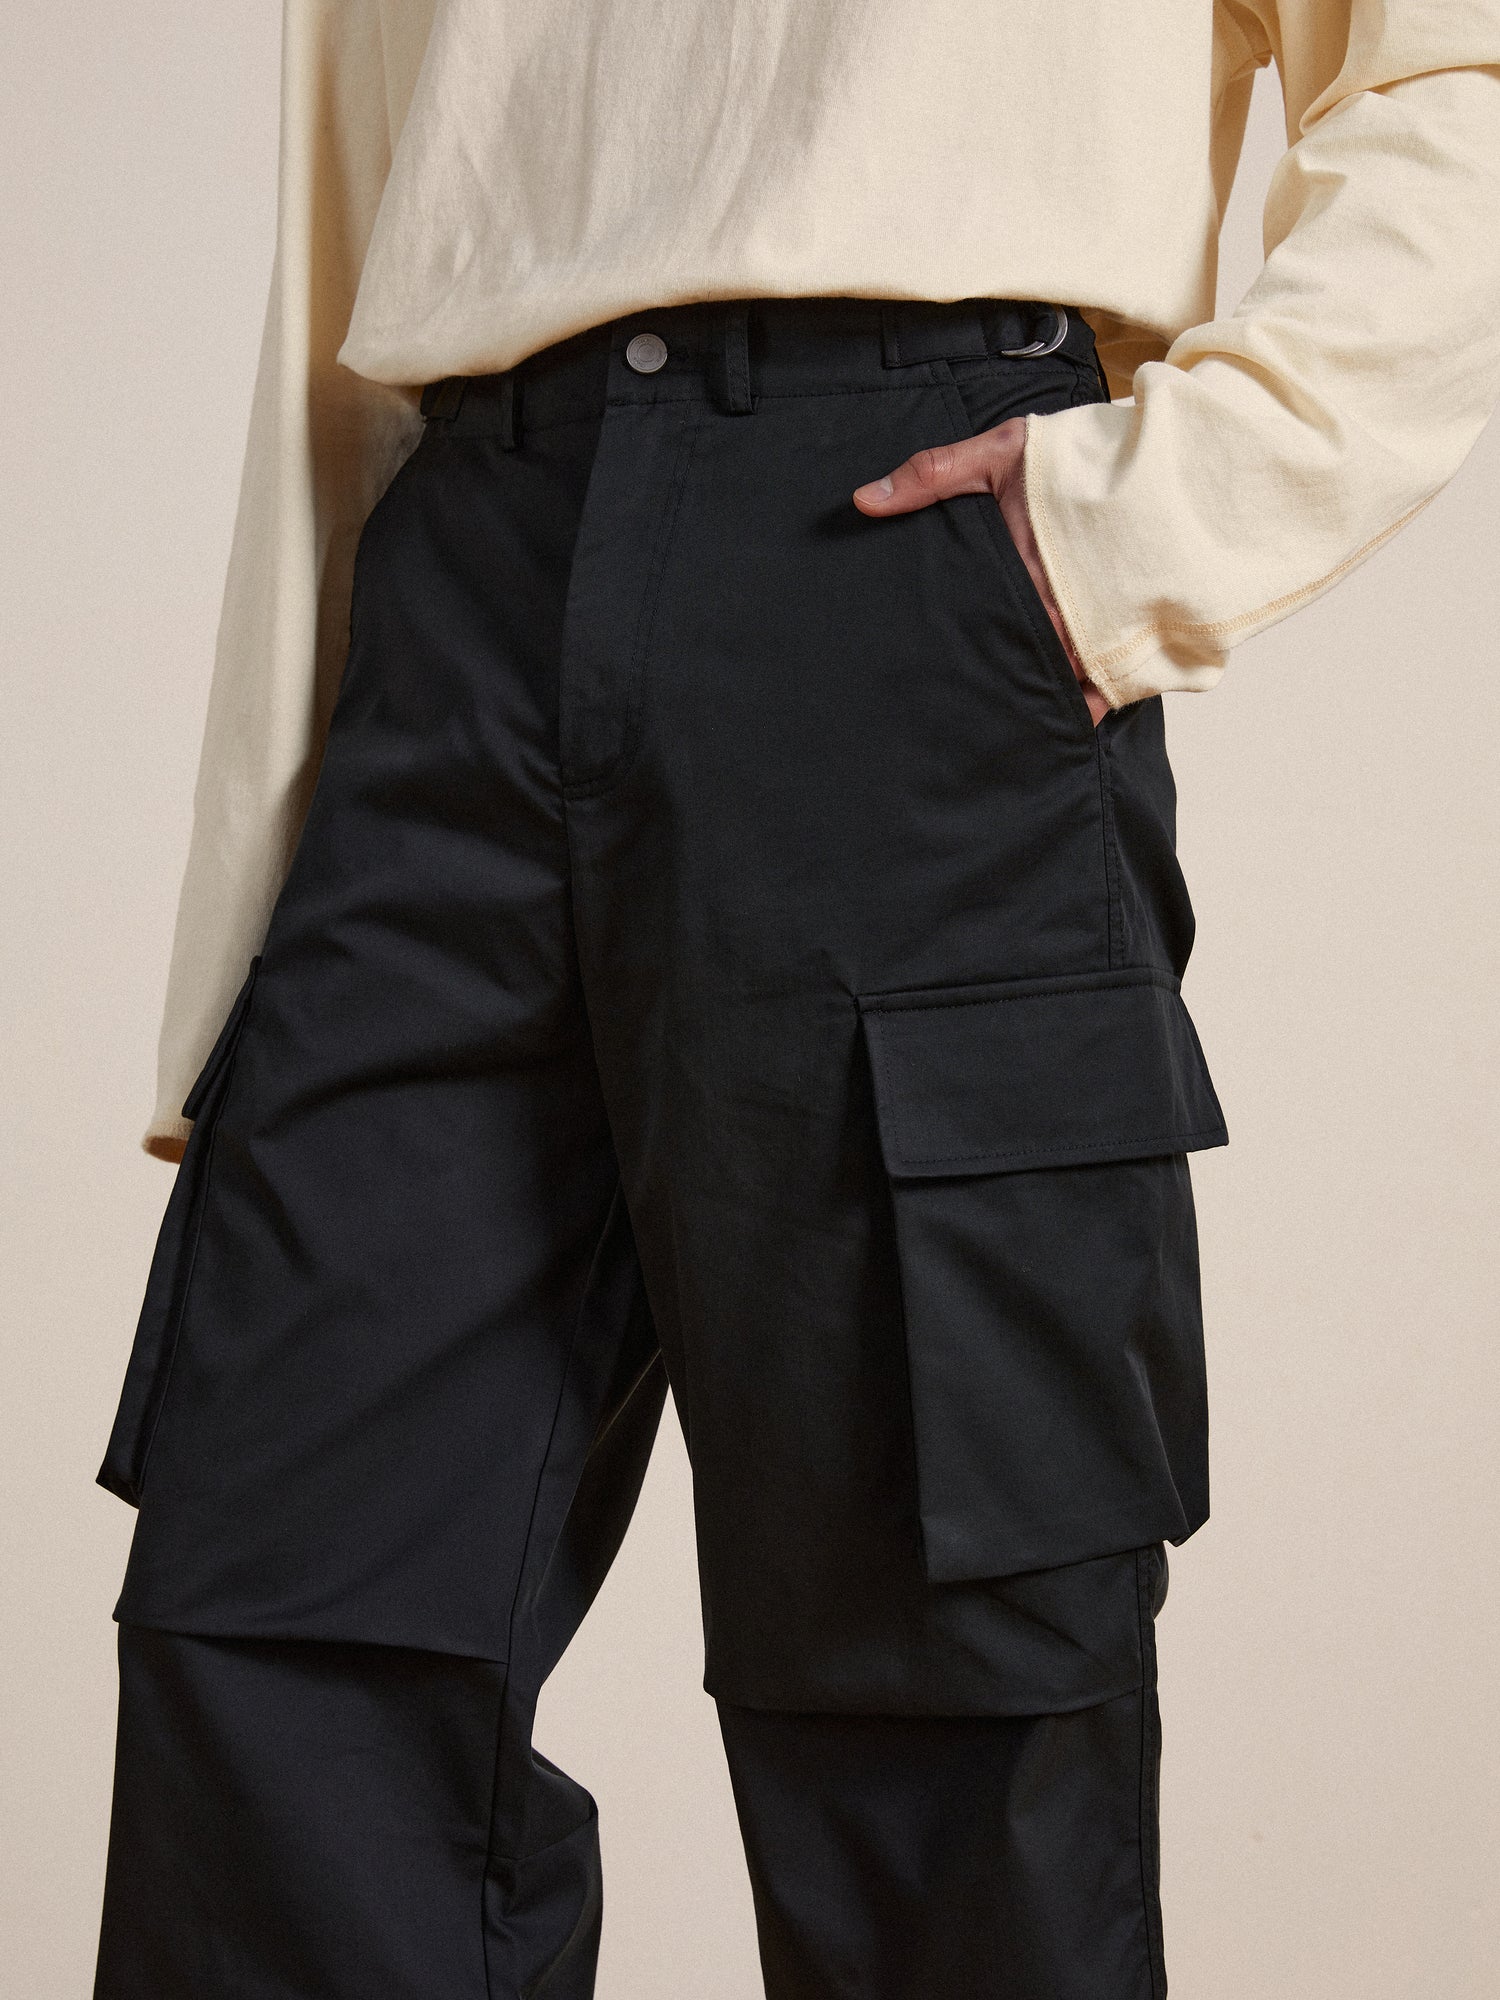 A man wearing black Elbas cargo pants with adjustable waist tabs and a white tee.